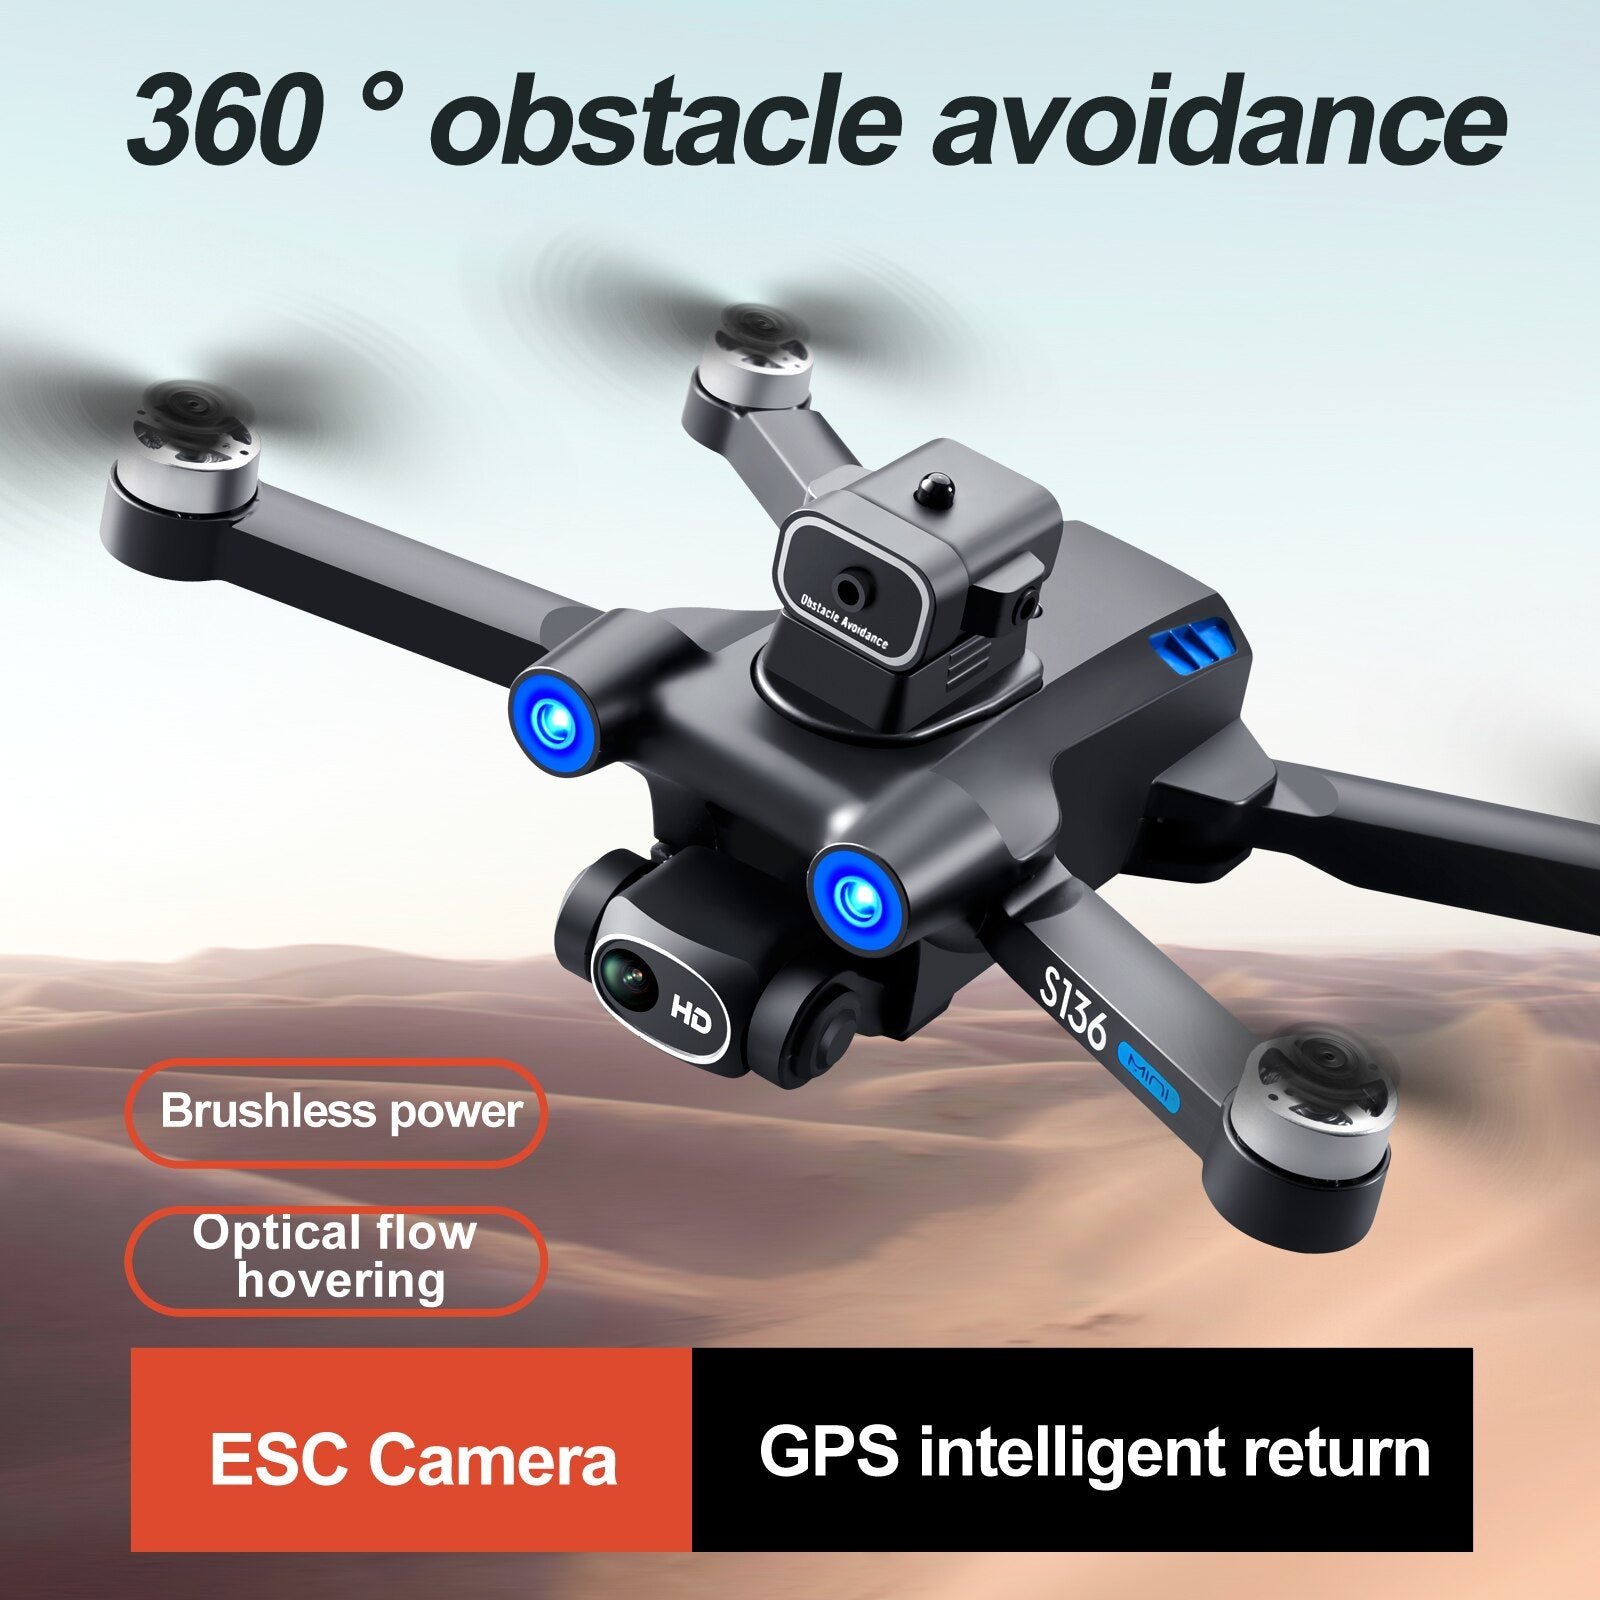 S136 GPS Drone, 0 360 Obstacle avoidance Brushless power Optical